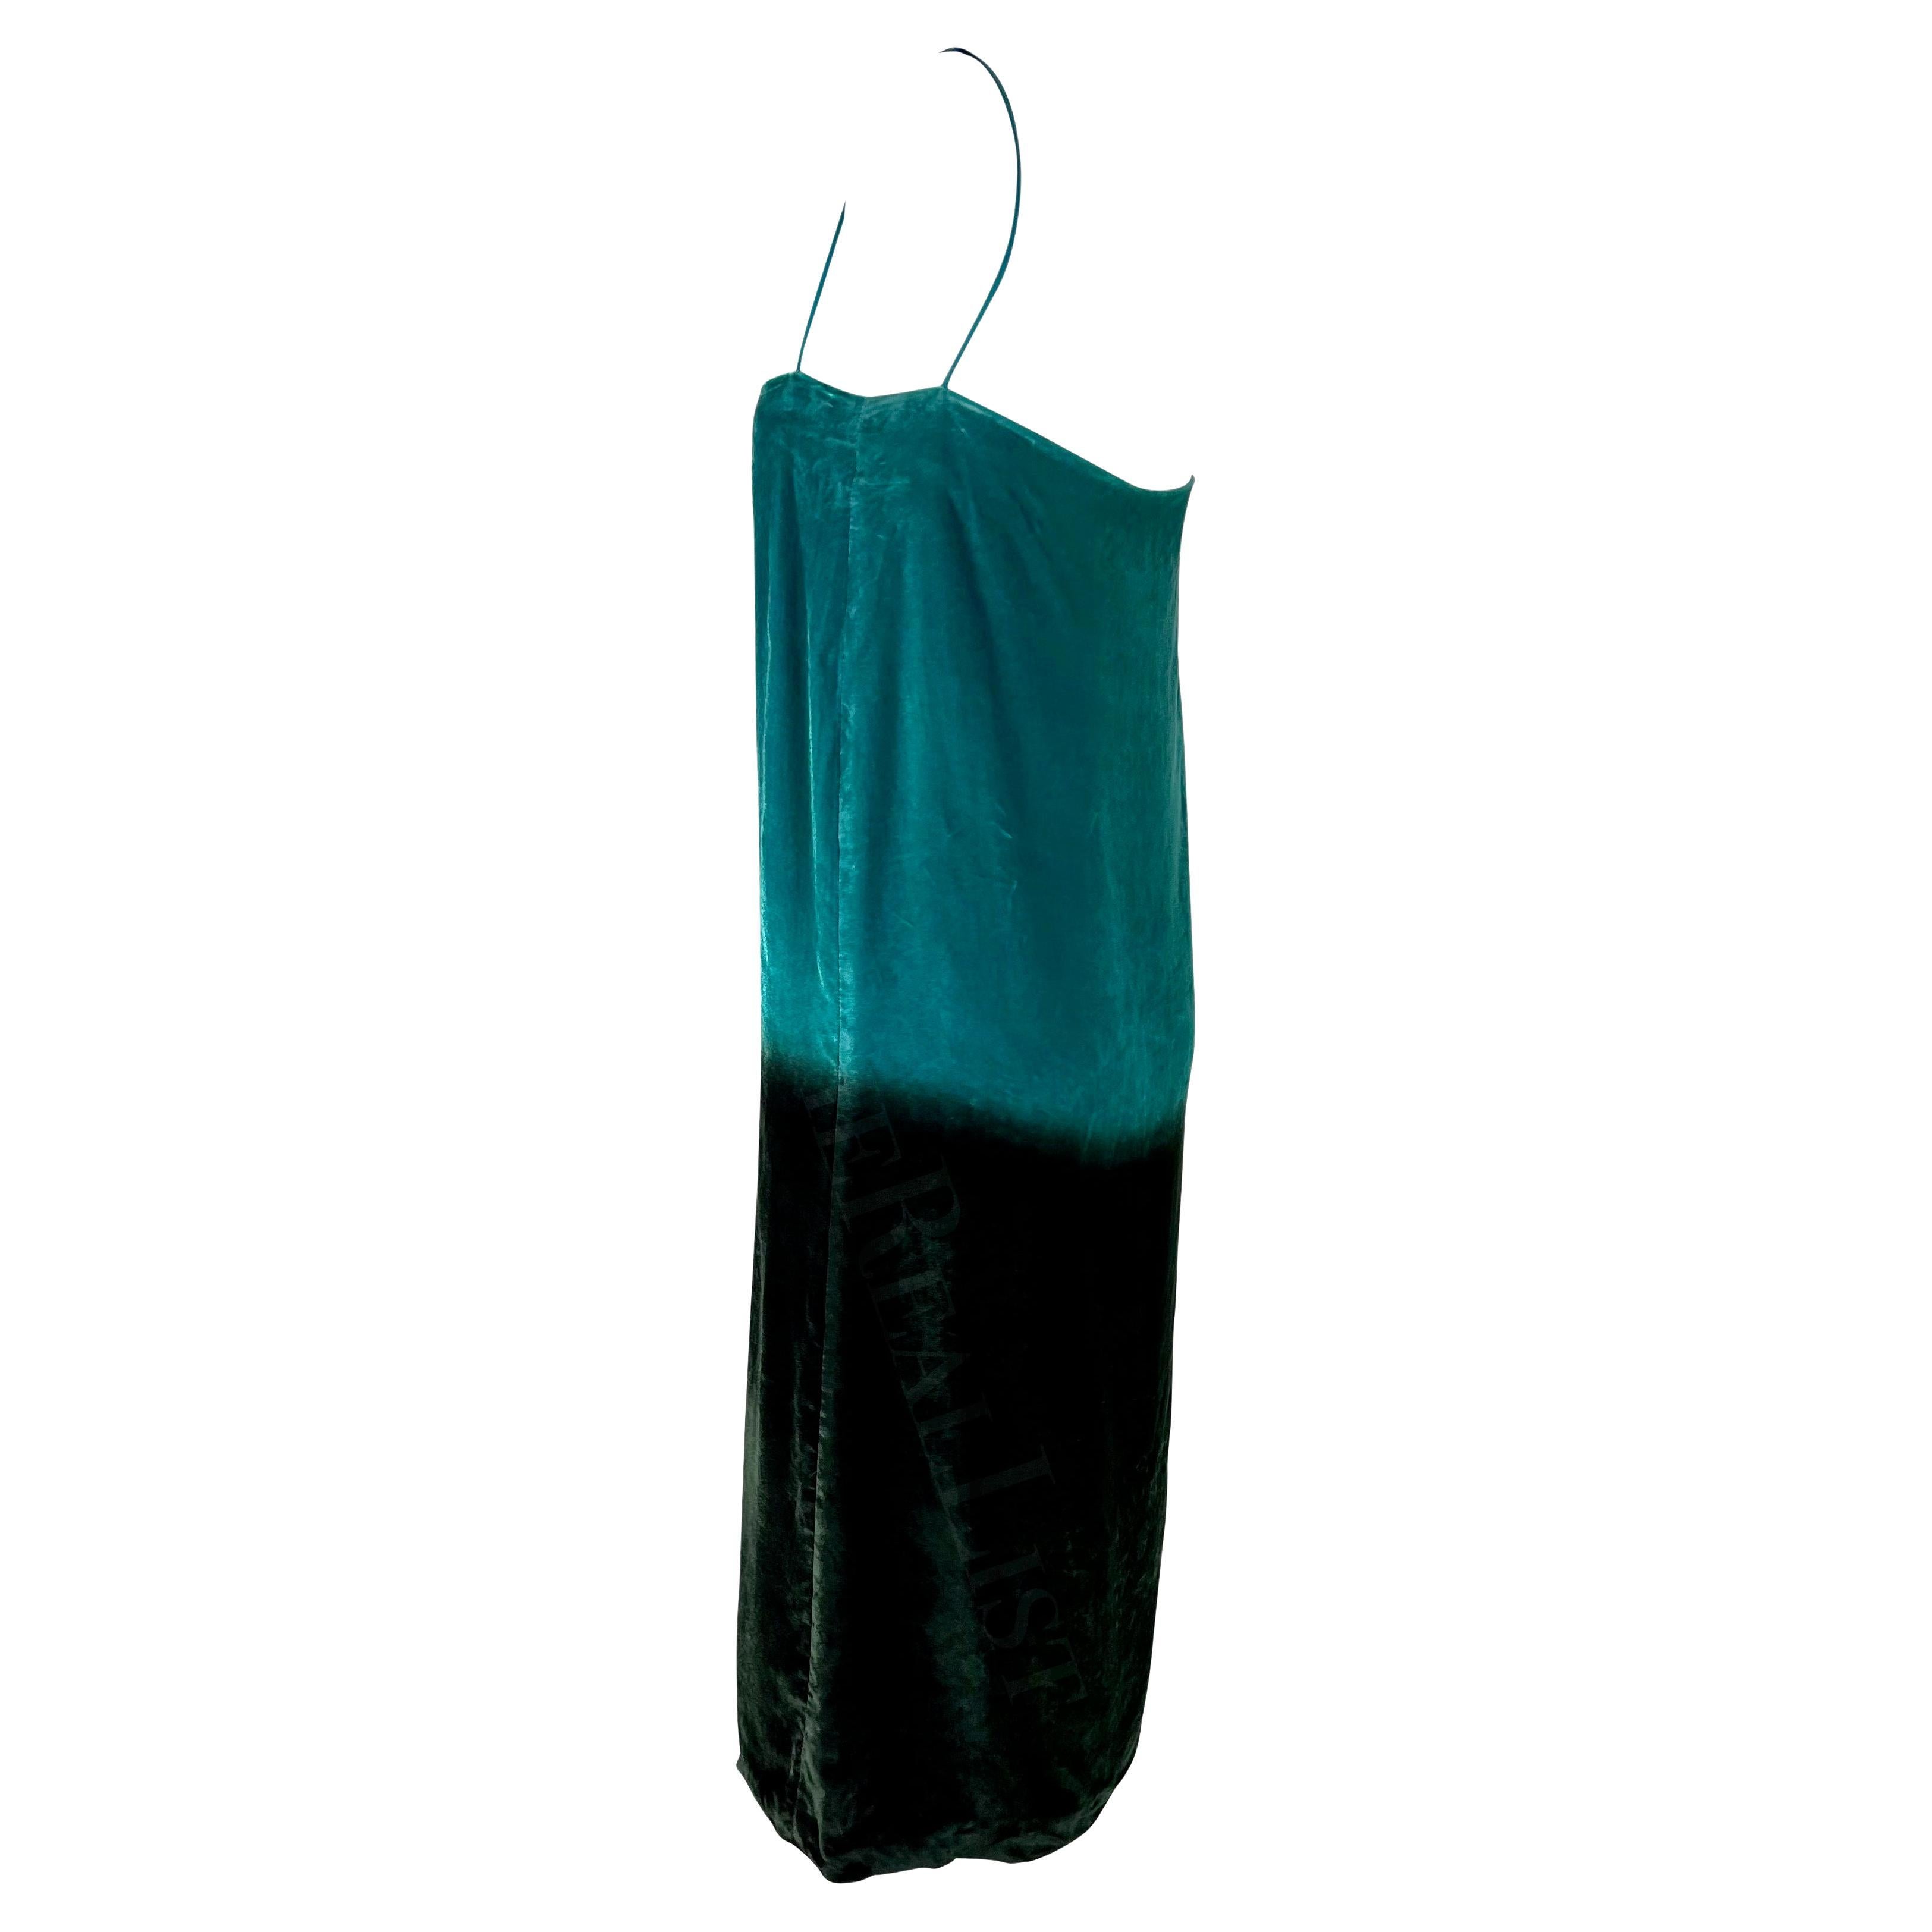 S/S 1997 Gucci by Tom Ford Runway Green Blue Ombré Velvet Shift Dress For Sale 4